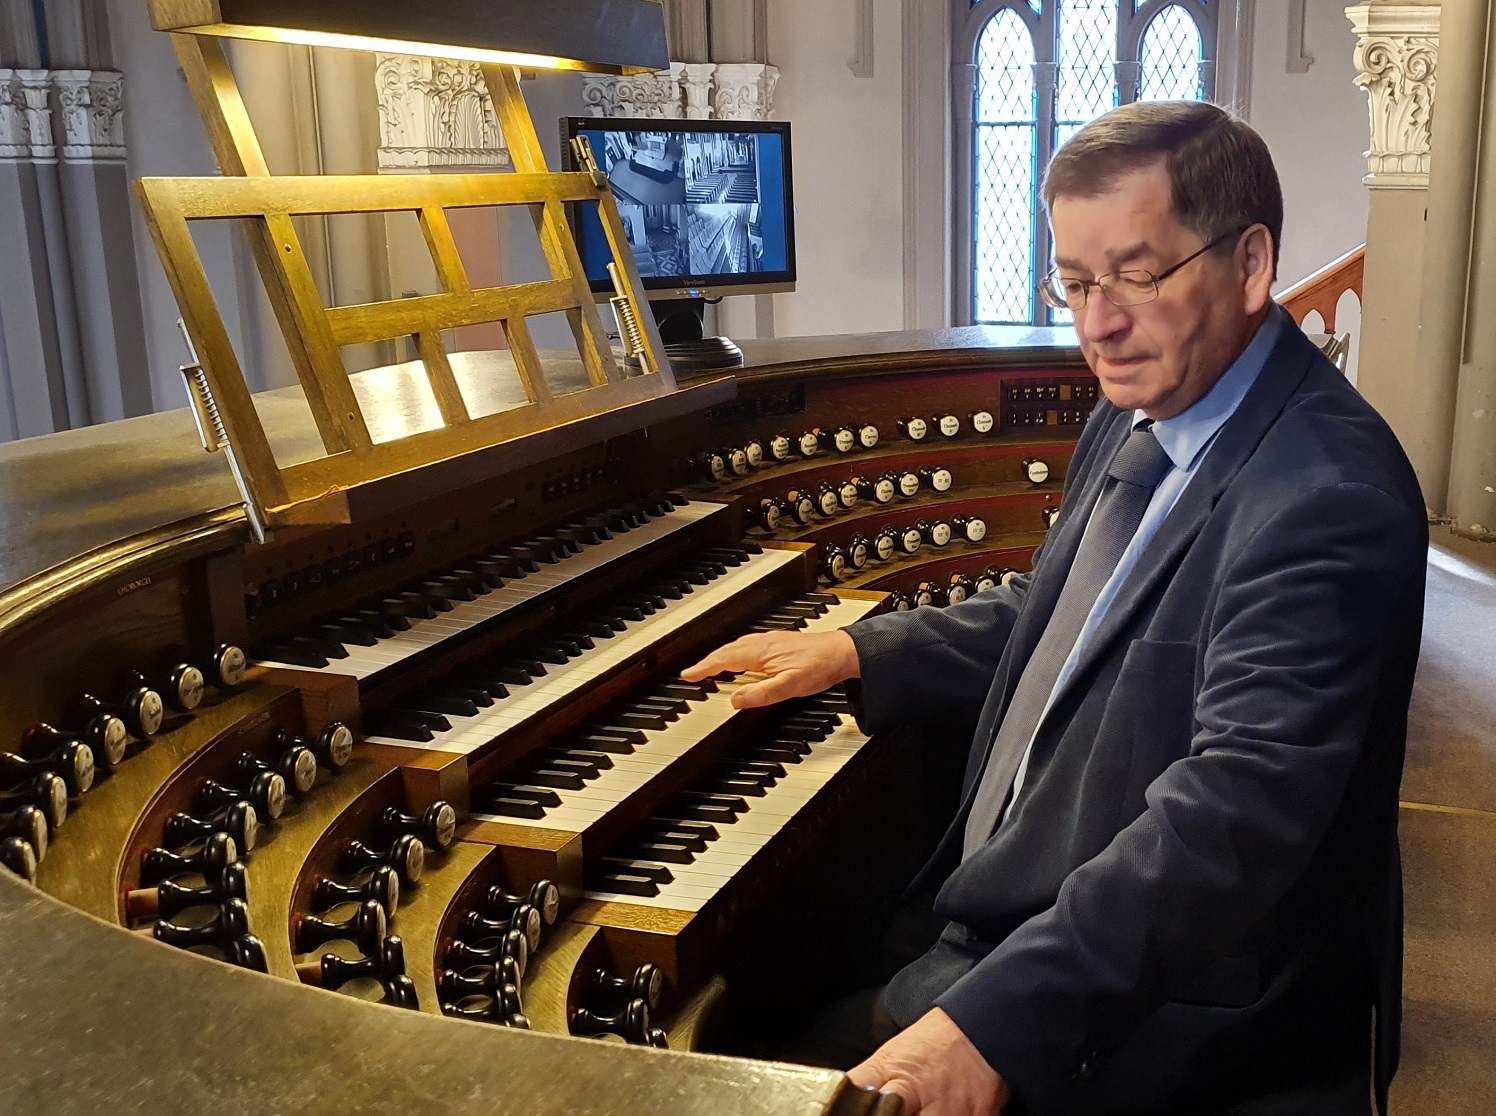 Hans U. Hielscher plays his "home" organ at the Marktkirche Wiesbaden (Lutheran Cathedral of...